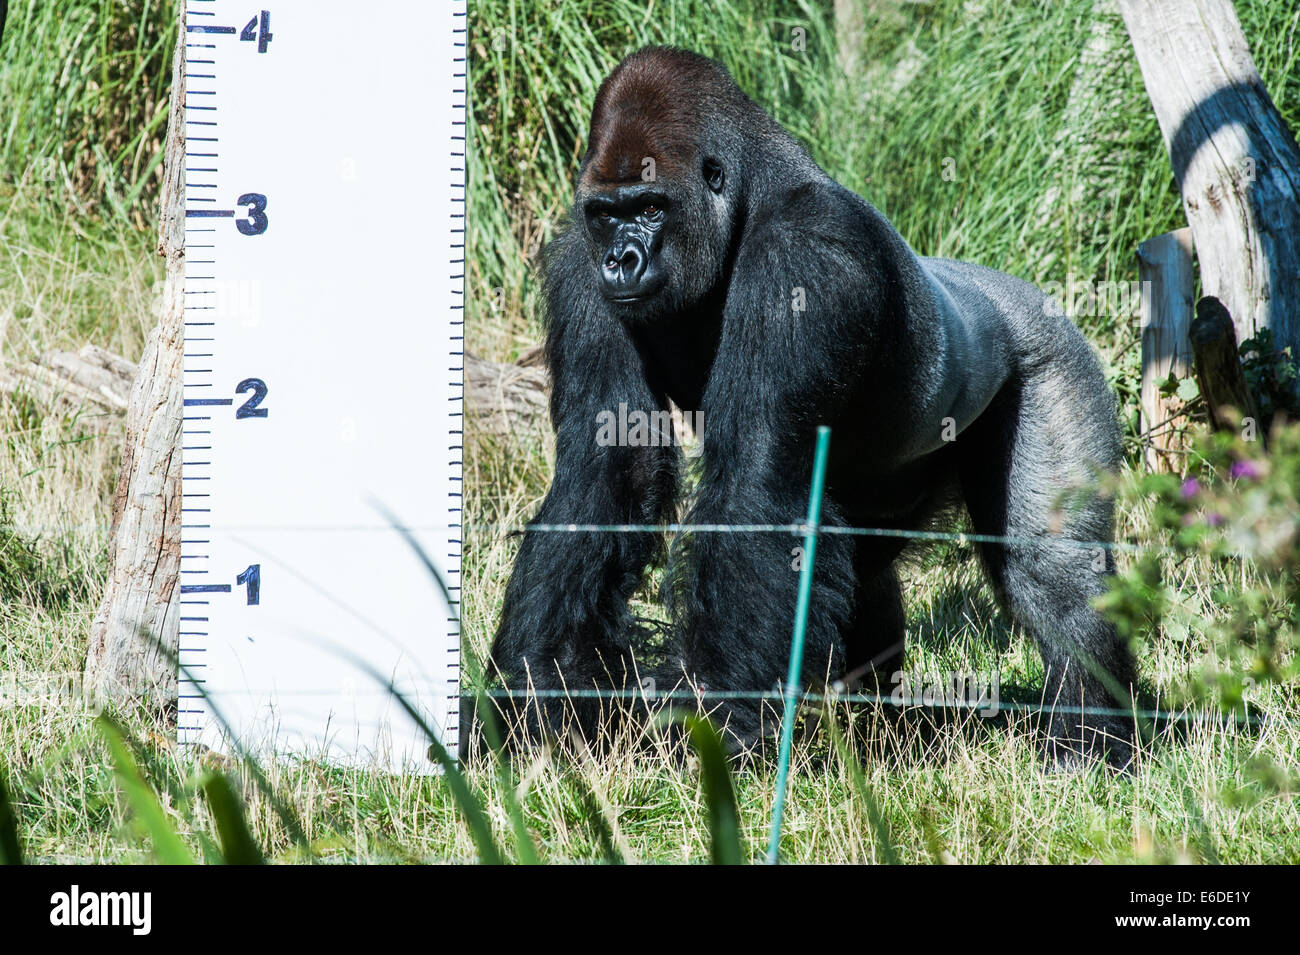 London, UK. 21st Aug, 2014. 7ft tall Kumbuka, the silverback Western Lowland gorilla, weighing 191.8 Kg, is measured during the ZSL London Zoo’s annual animal weigh-in London. Zookeepers spend hours each year recording every animal’s vital statistics, enabling them to keep a close check on their overall well-being. Credit:  Piero Cruciatti/Alamy Live News Stock Photo